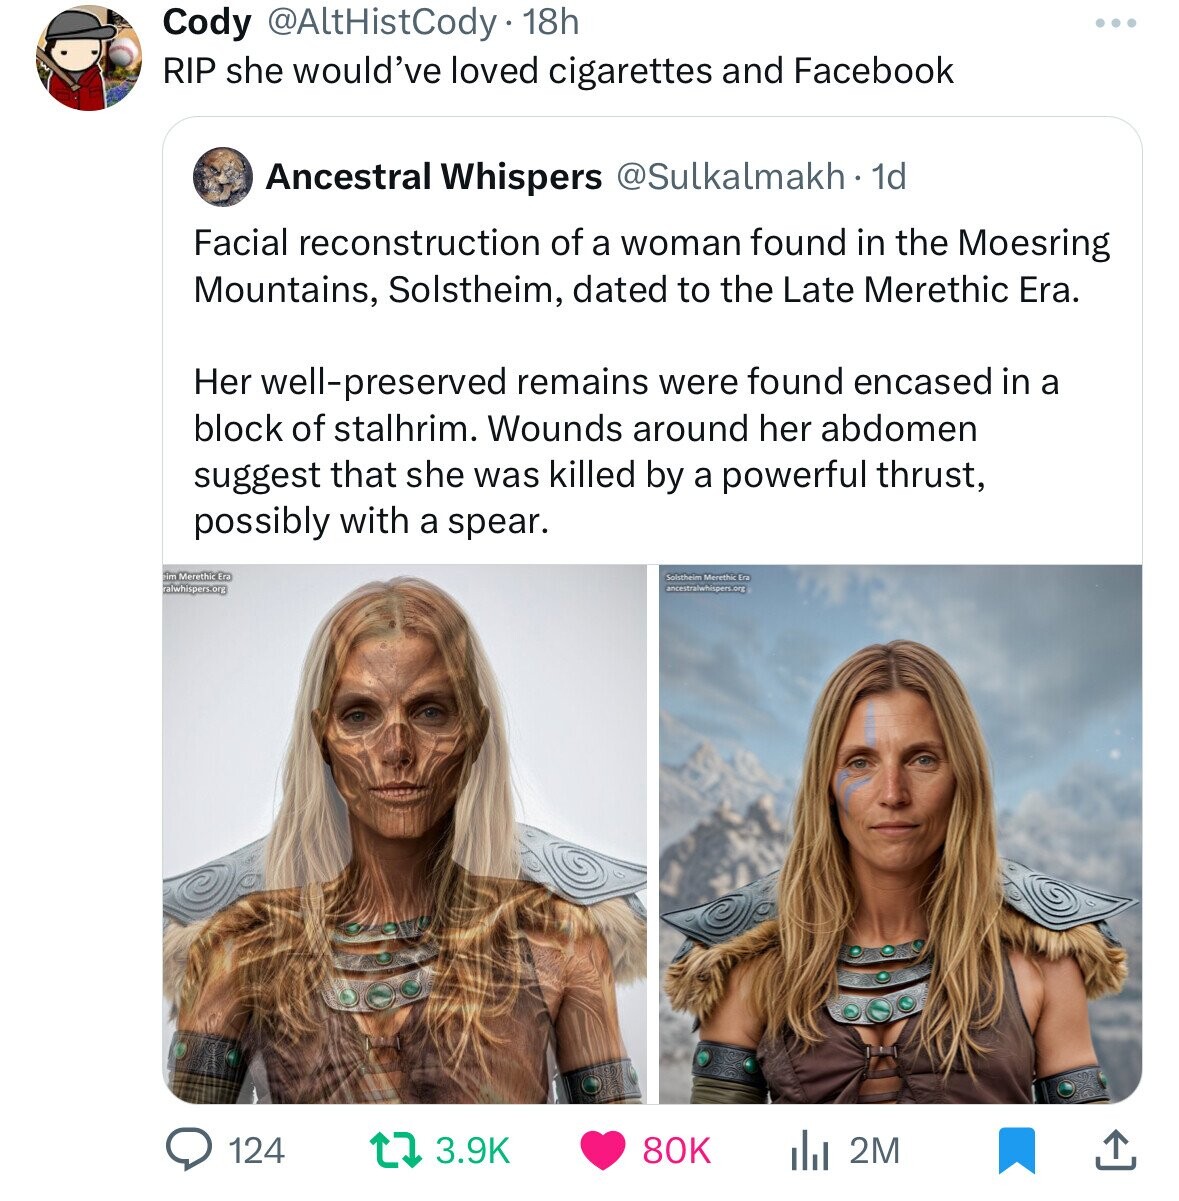 girl - Cody . 18h Rip she would've loved cigarettes and Facebook Ancestral Whispers . 1d Facial reconstruction of a woman found in the Moesring Mountains, Solstheim, dated to the Late Merethic Era. Her wellpreserved remains were found encased in a block o